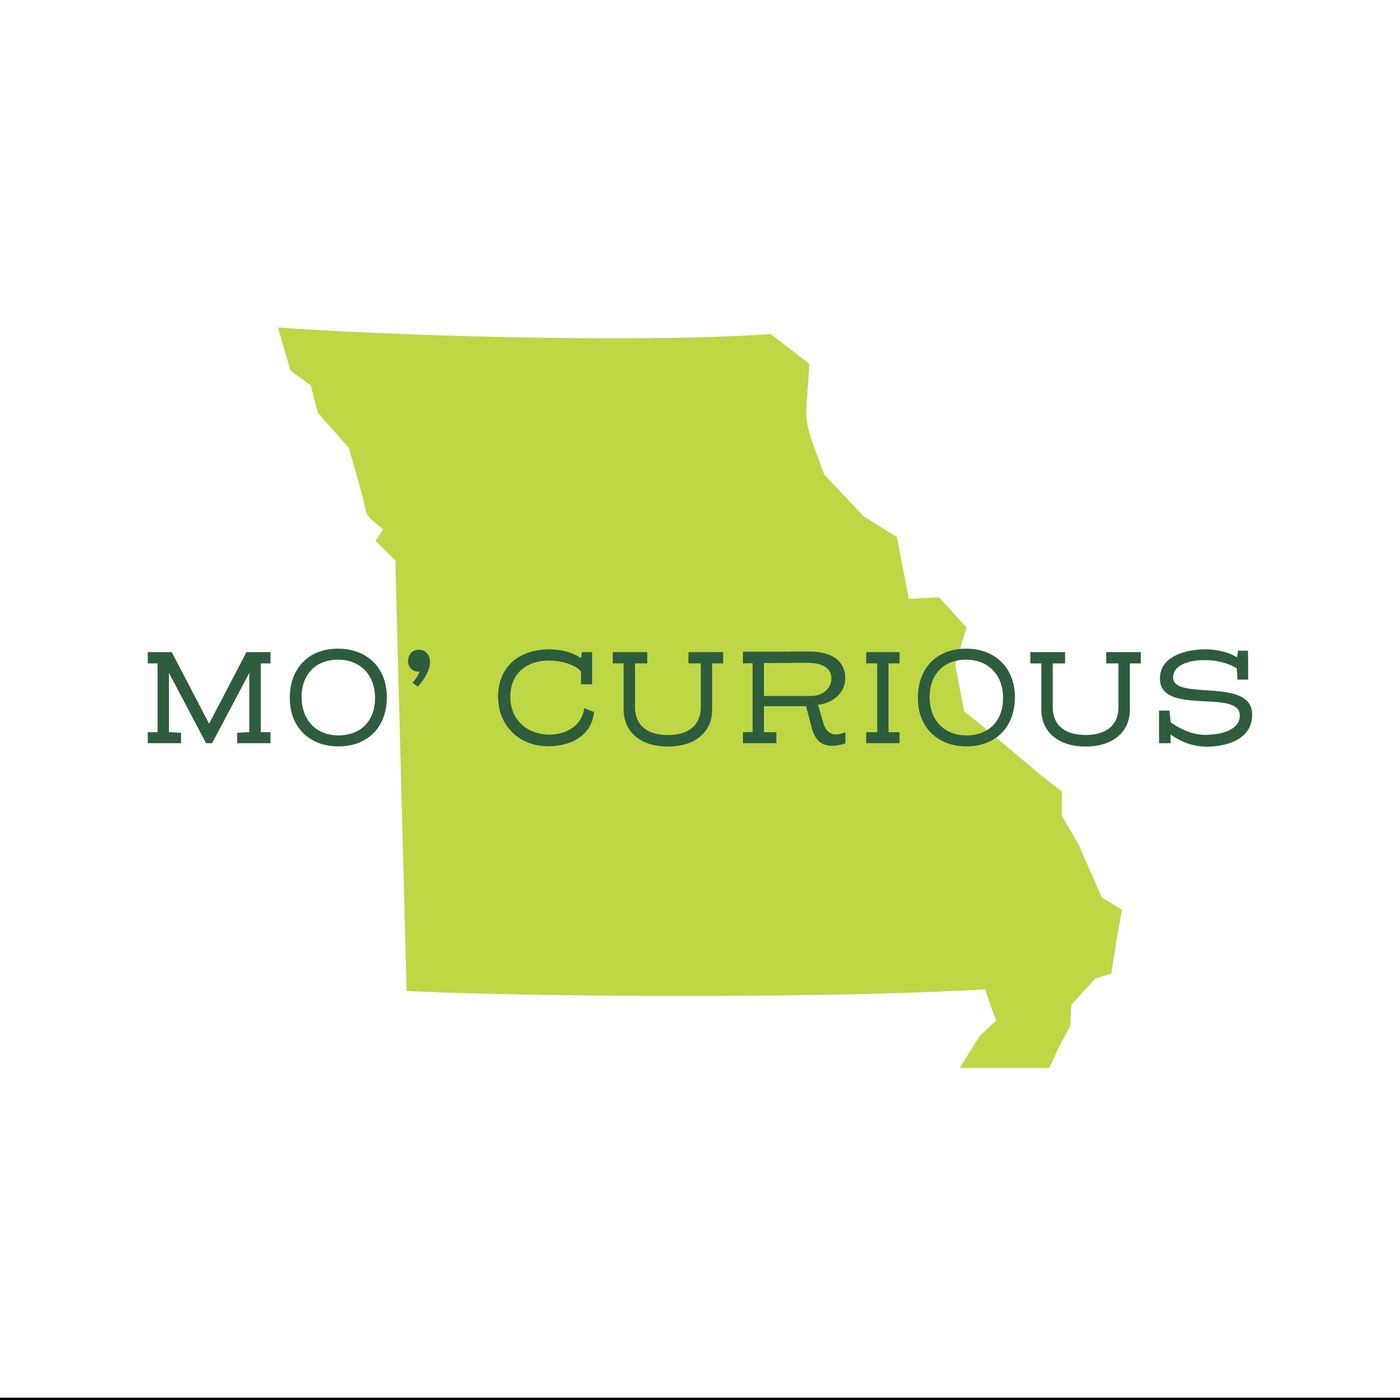 Mo' Curious: ‘There is a better way'